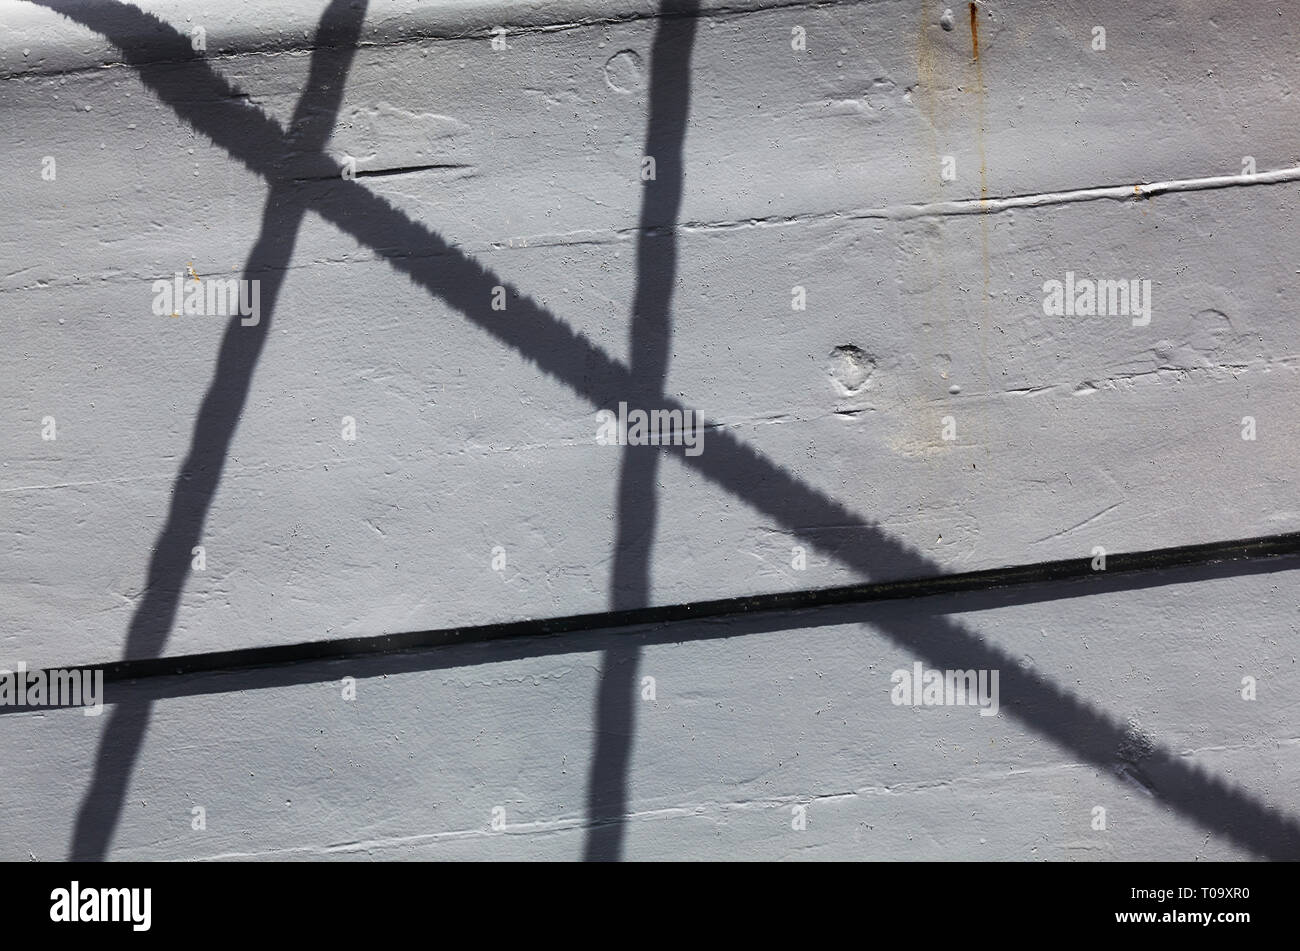 Shadow pattern of criss-crossing mooring lines on a boat in the harbour at Brixham, Devon, Great Britain. Stock Photo